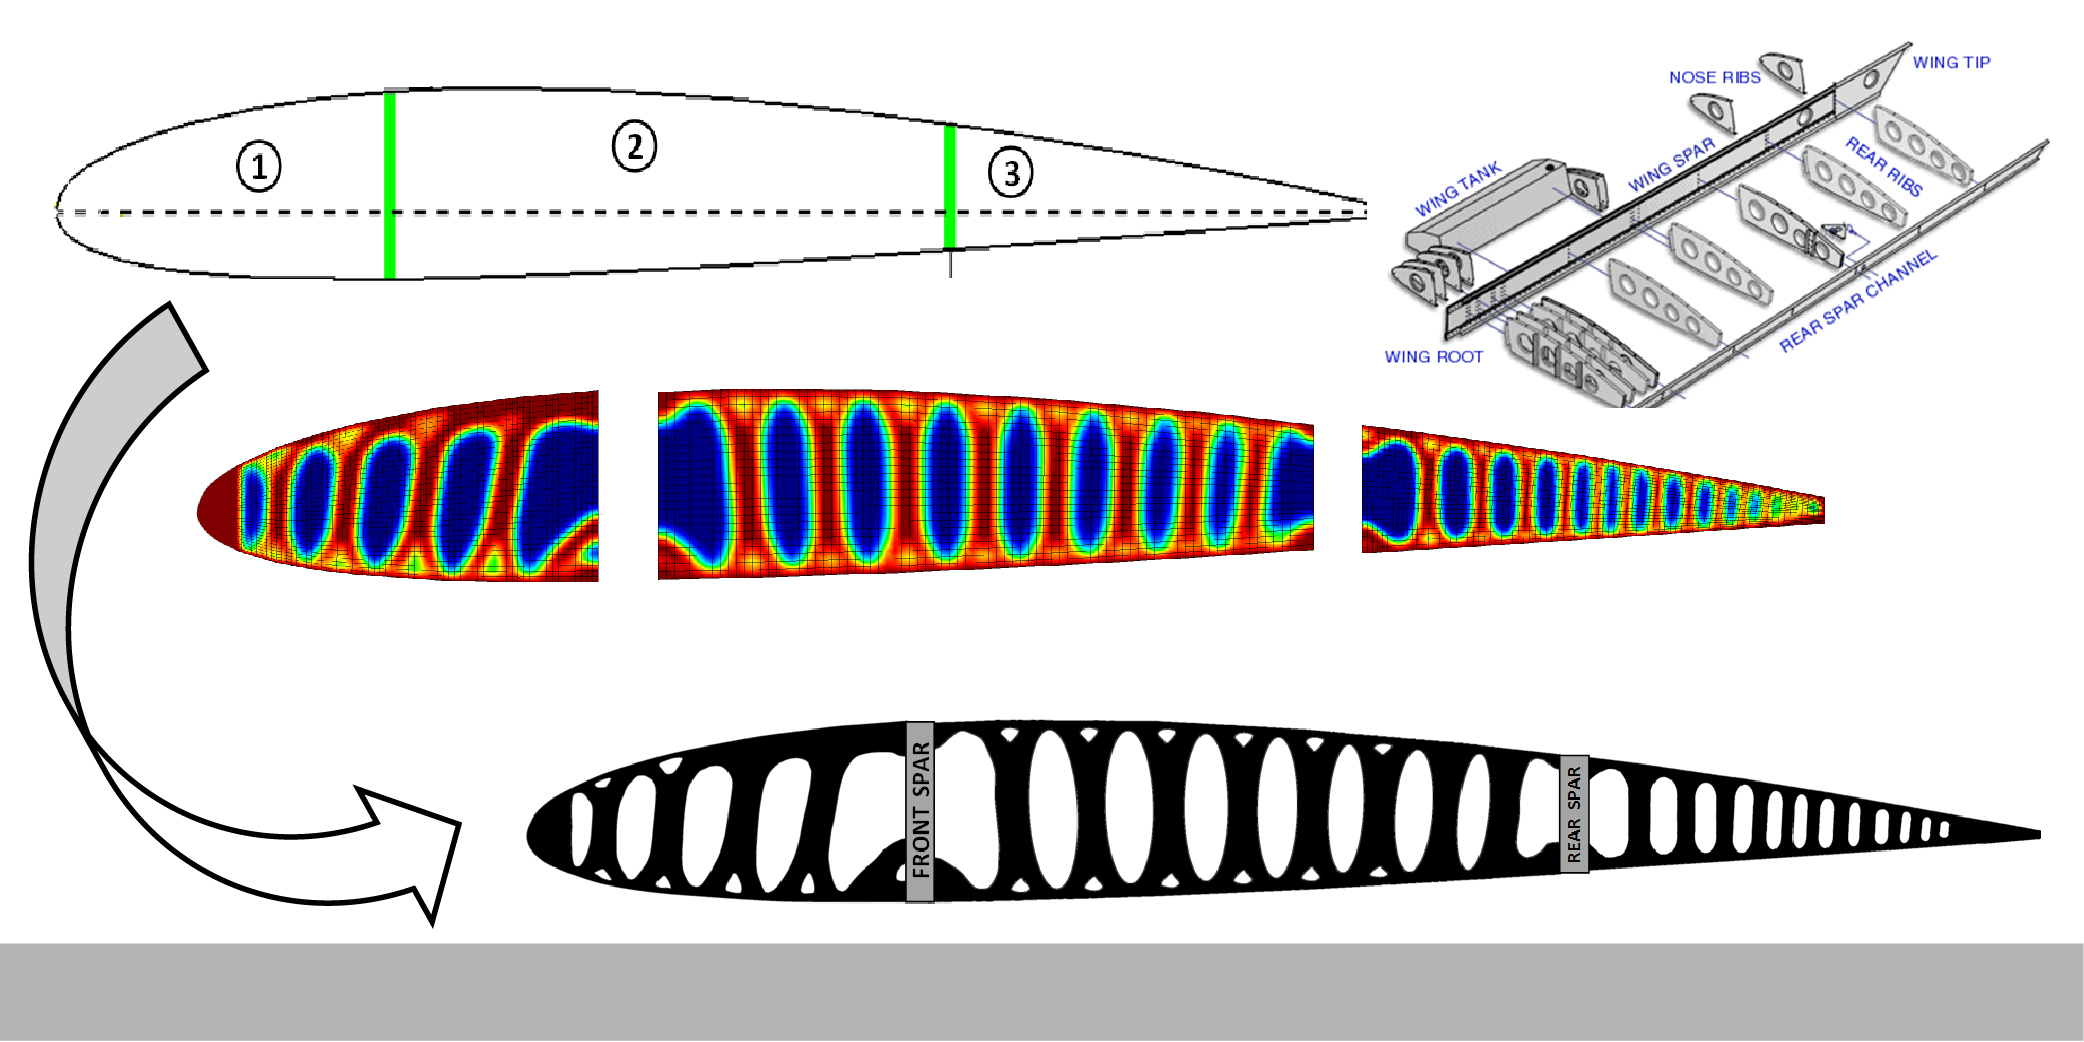 Project - Topology optimization of an aircraft wing rib structure